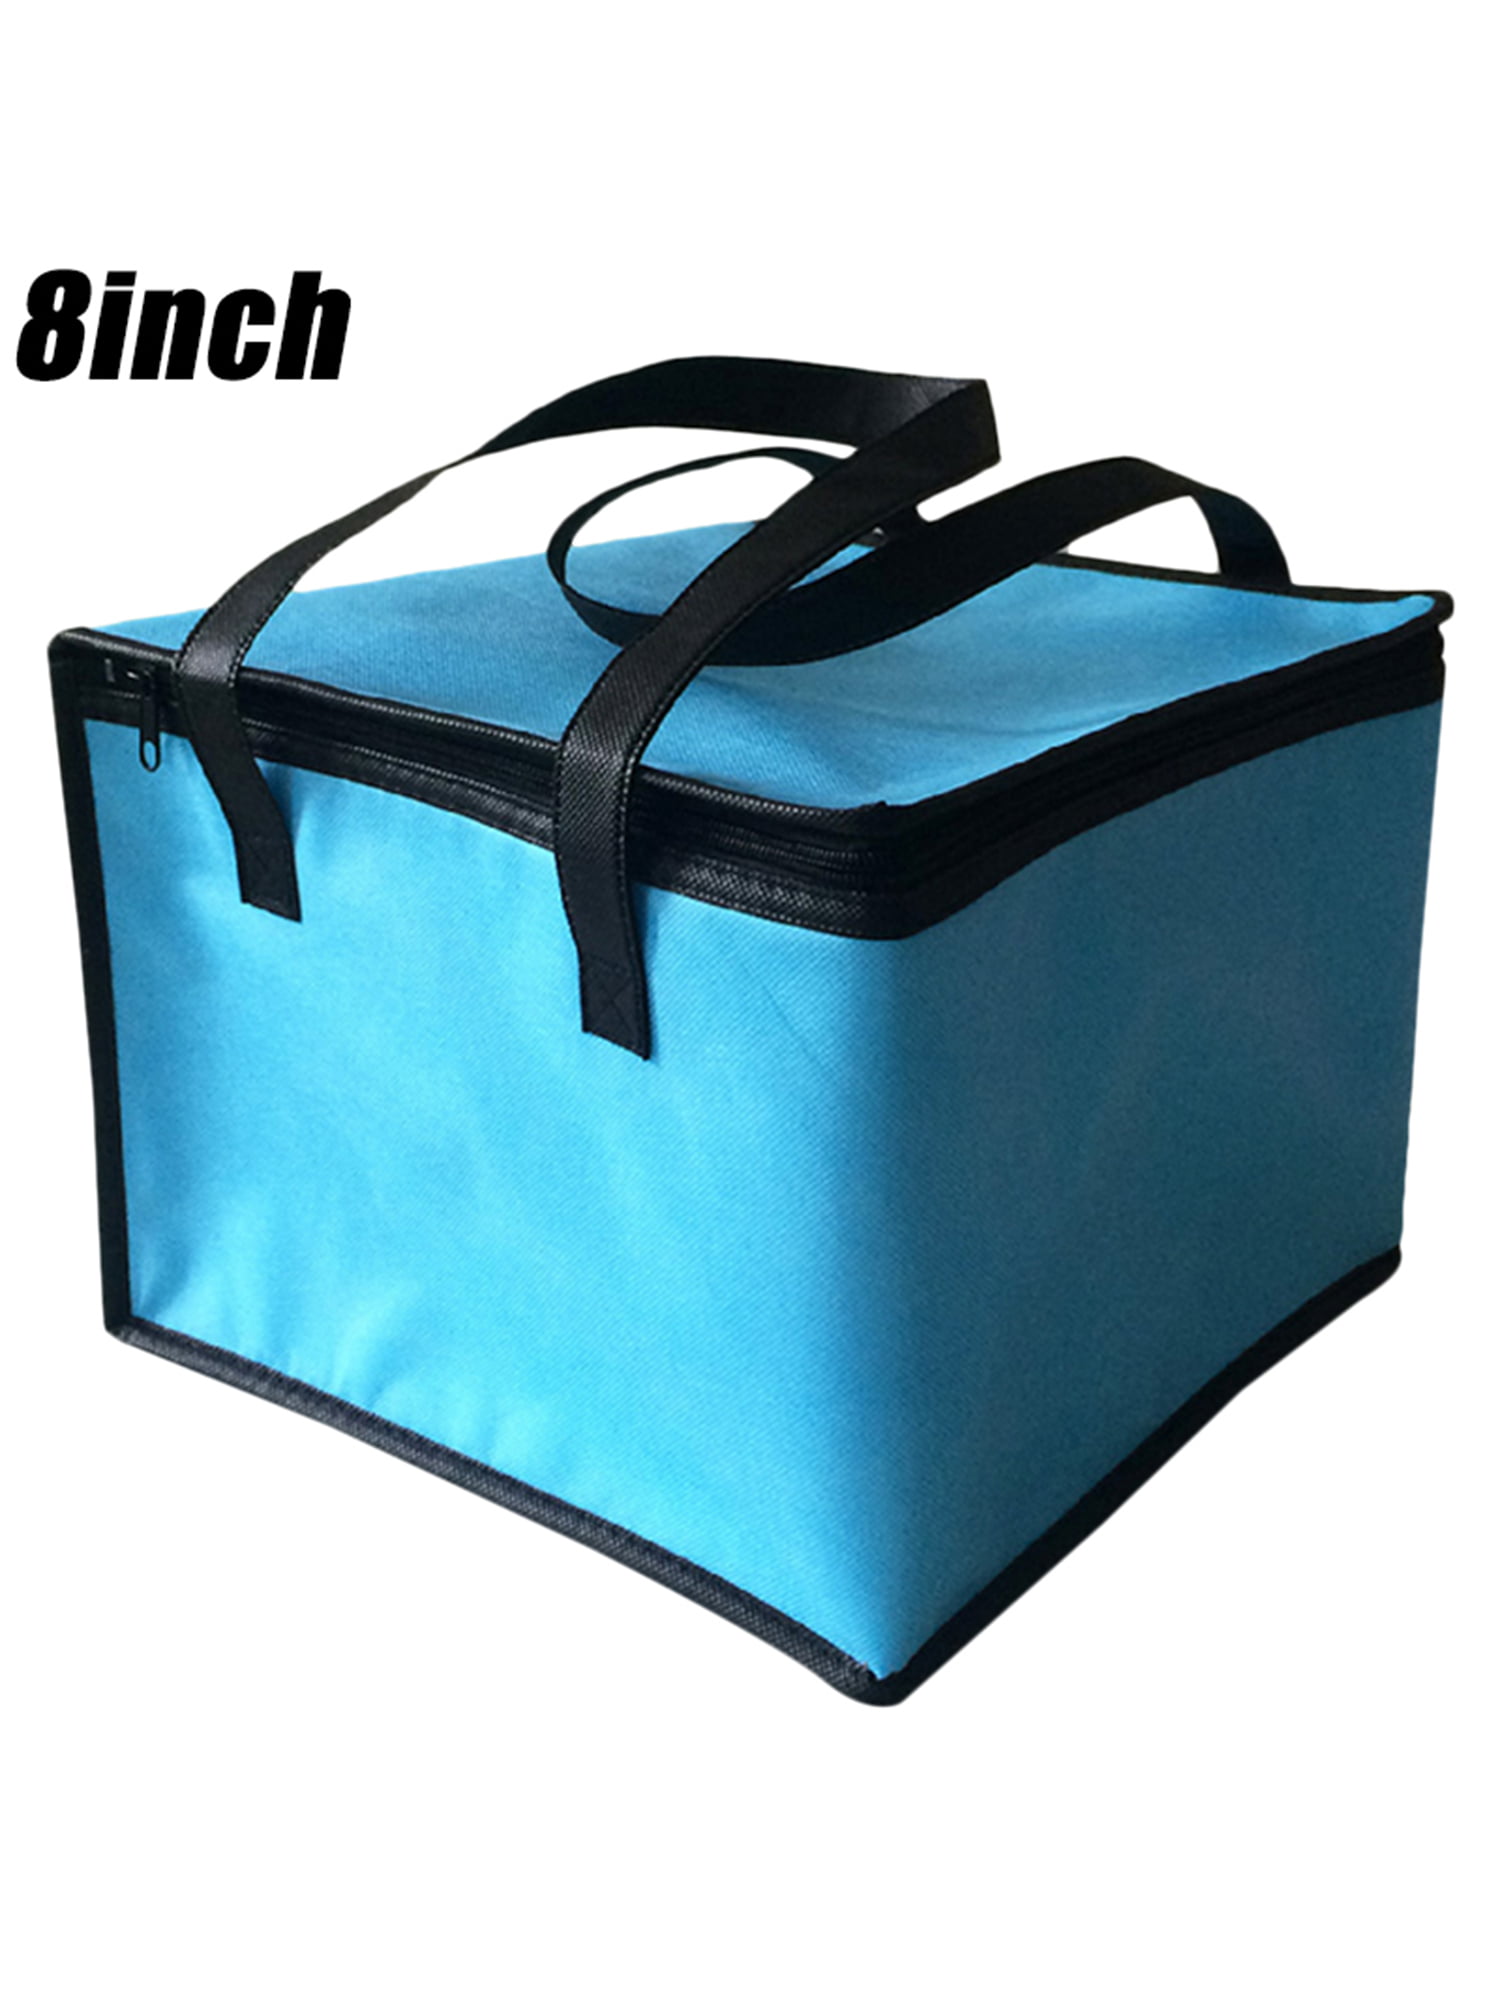 Chair Details about   Picnic Lunch Bag Insulated Cooler Warmer Travel Trolley Basket Organizer 